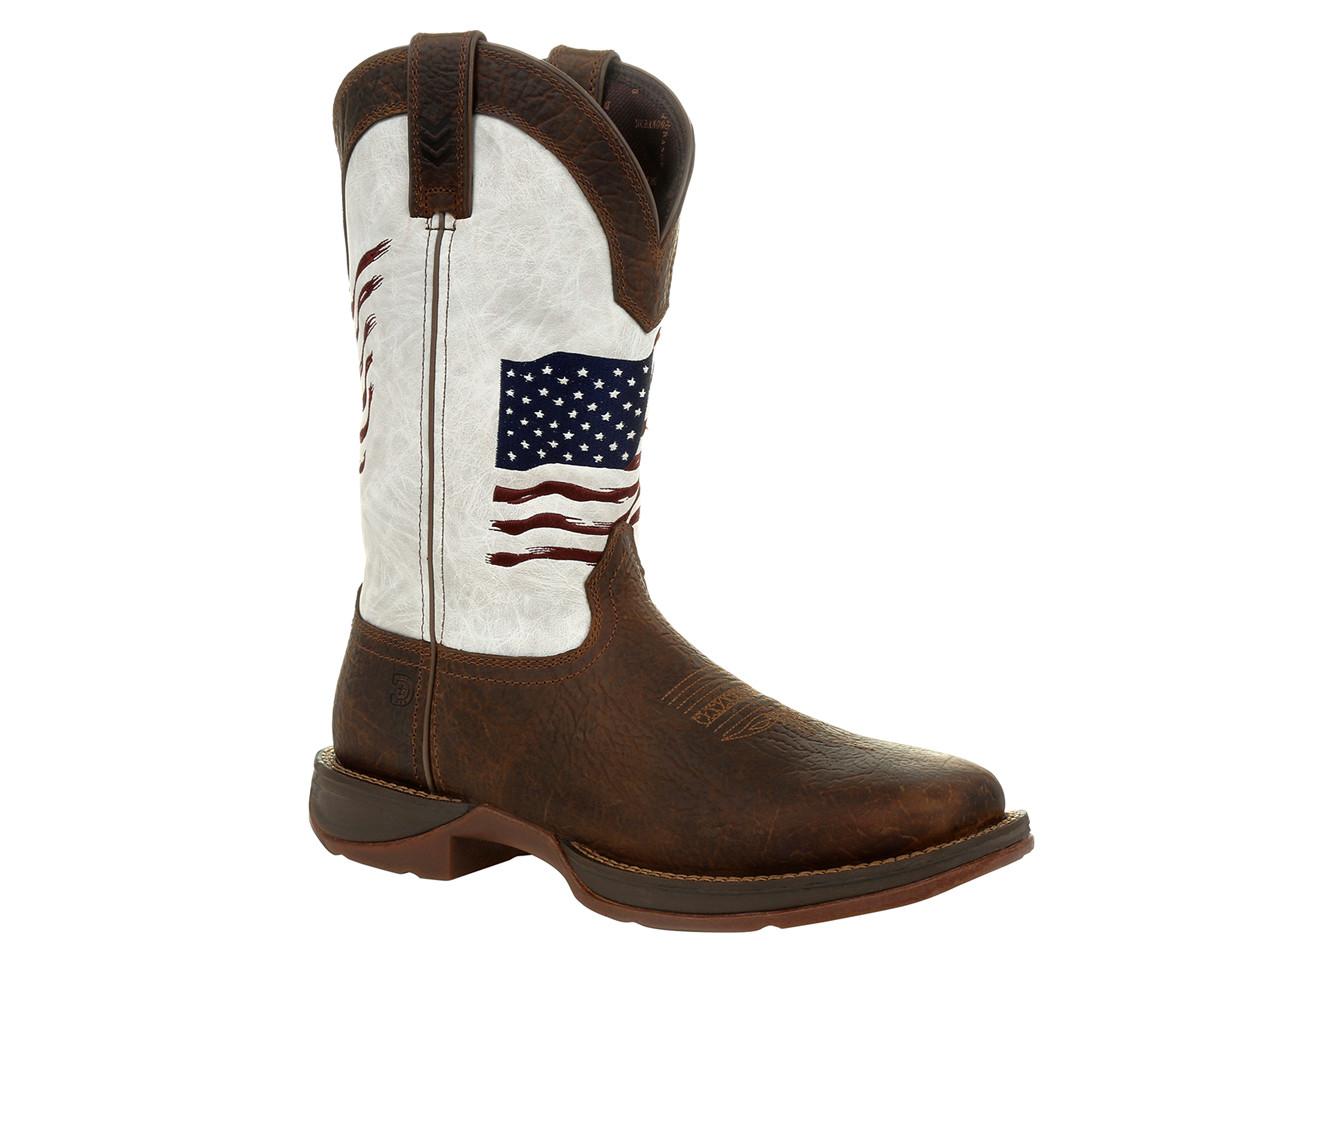 Men's Durango Rebel Distressed Flag Embroidery Western Boots